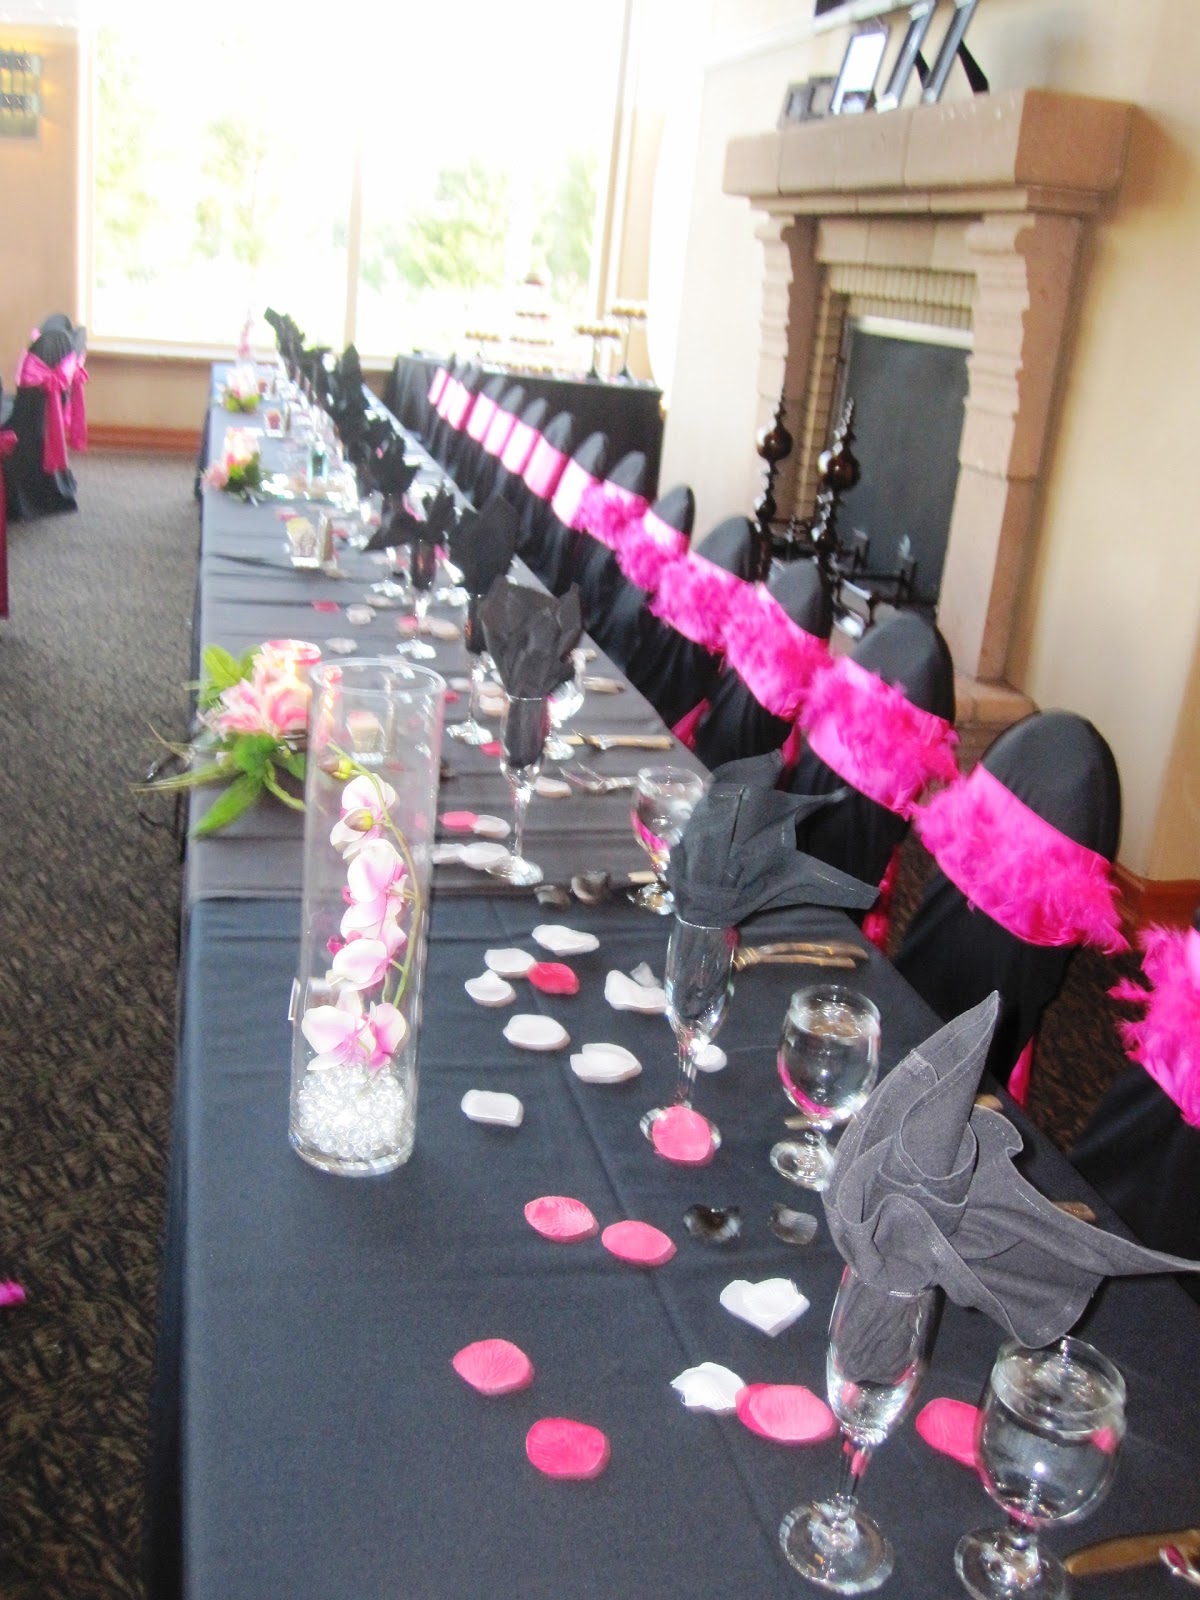 The hot pink satin sashes were